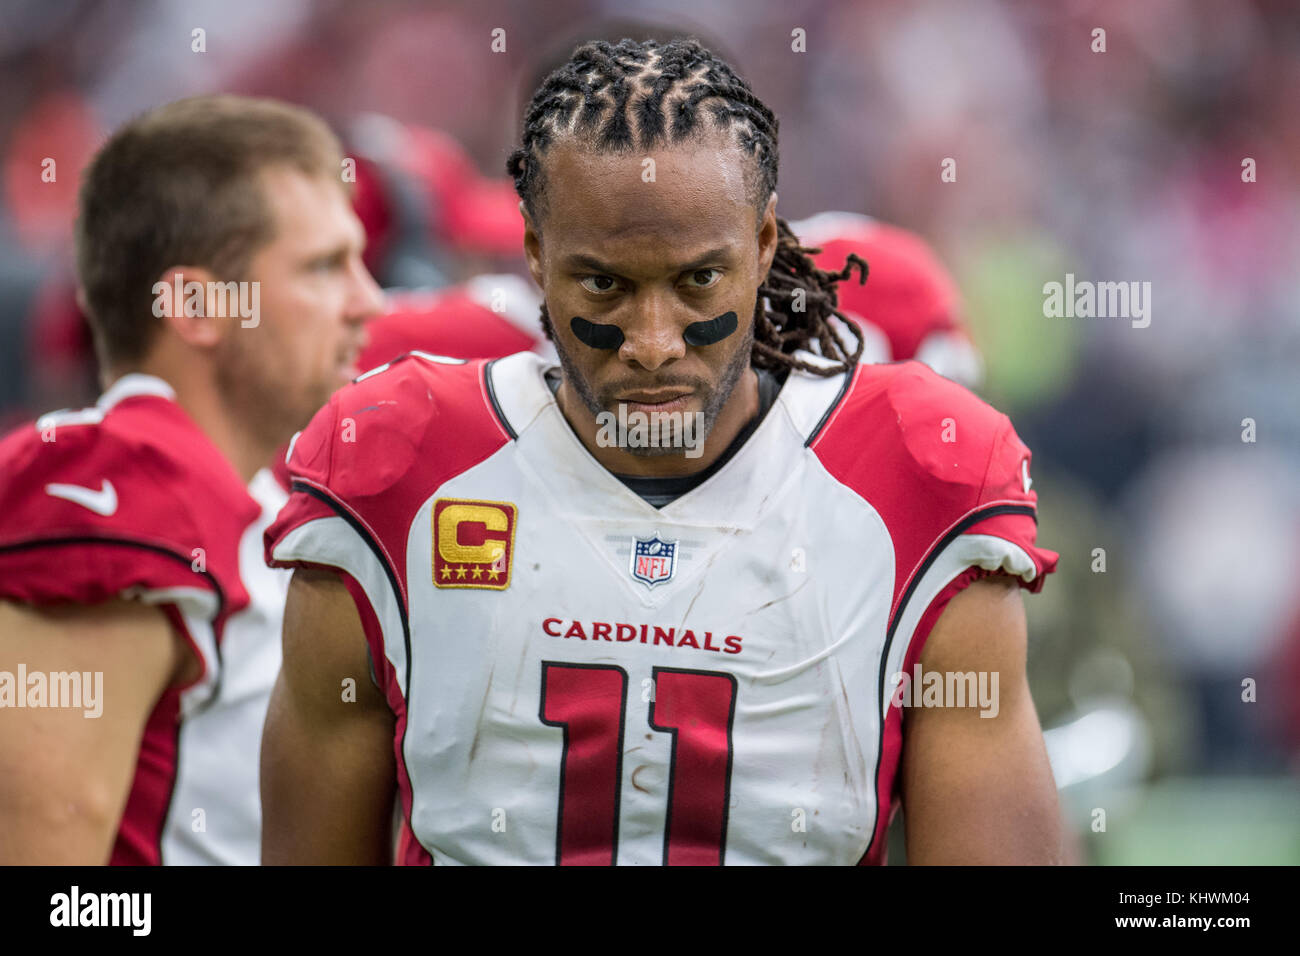 Houston, TX, USA. 19th Nov, 2017. Arizona Cardinals wide receiver Larry Fitzgerald (11) during the 3rd quarter of an NFL football game between the Houston Texans and the Arizona Cardinals at NRG Stadium in Houston, TX. The Texans won the game 31 to 21.Trask Smith/CSM/Alamy Live News Stock Photo